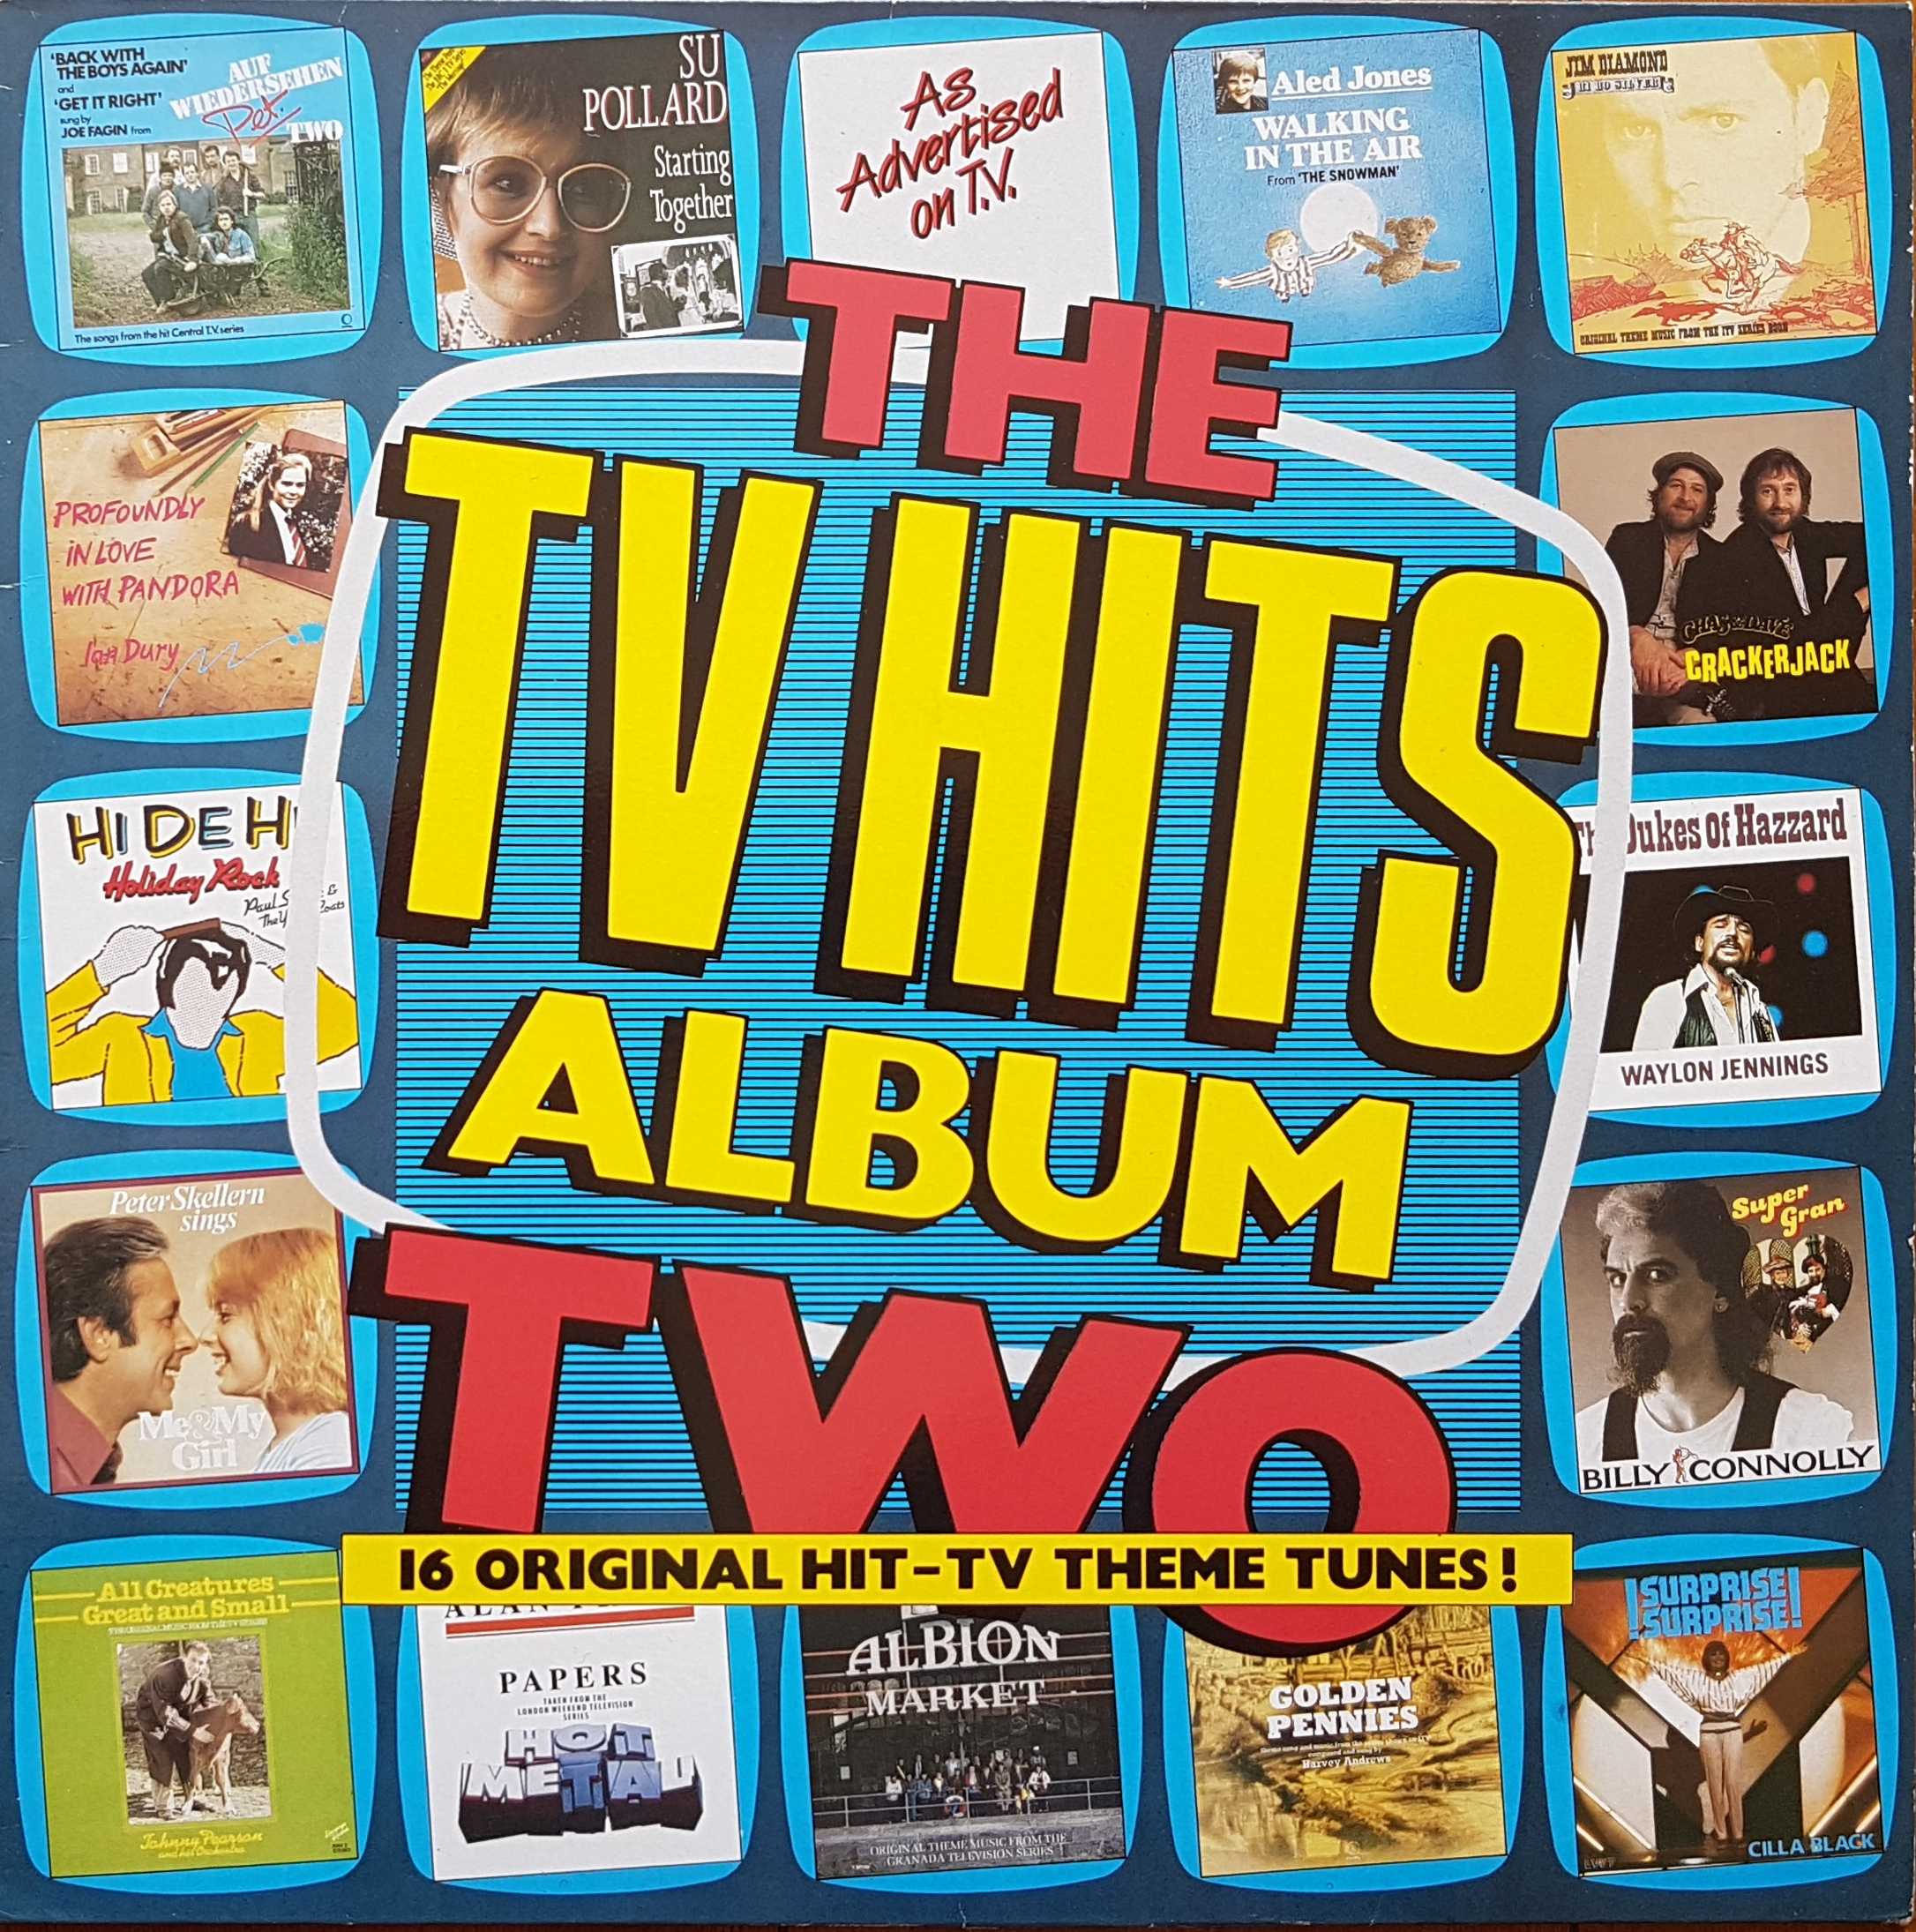 Picture of TVLP 10 The TV hits album - Volume 2 by artist Various from ITV, Channel 4 and Channel 5 library